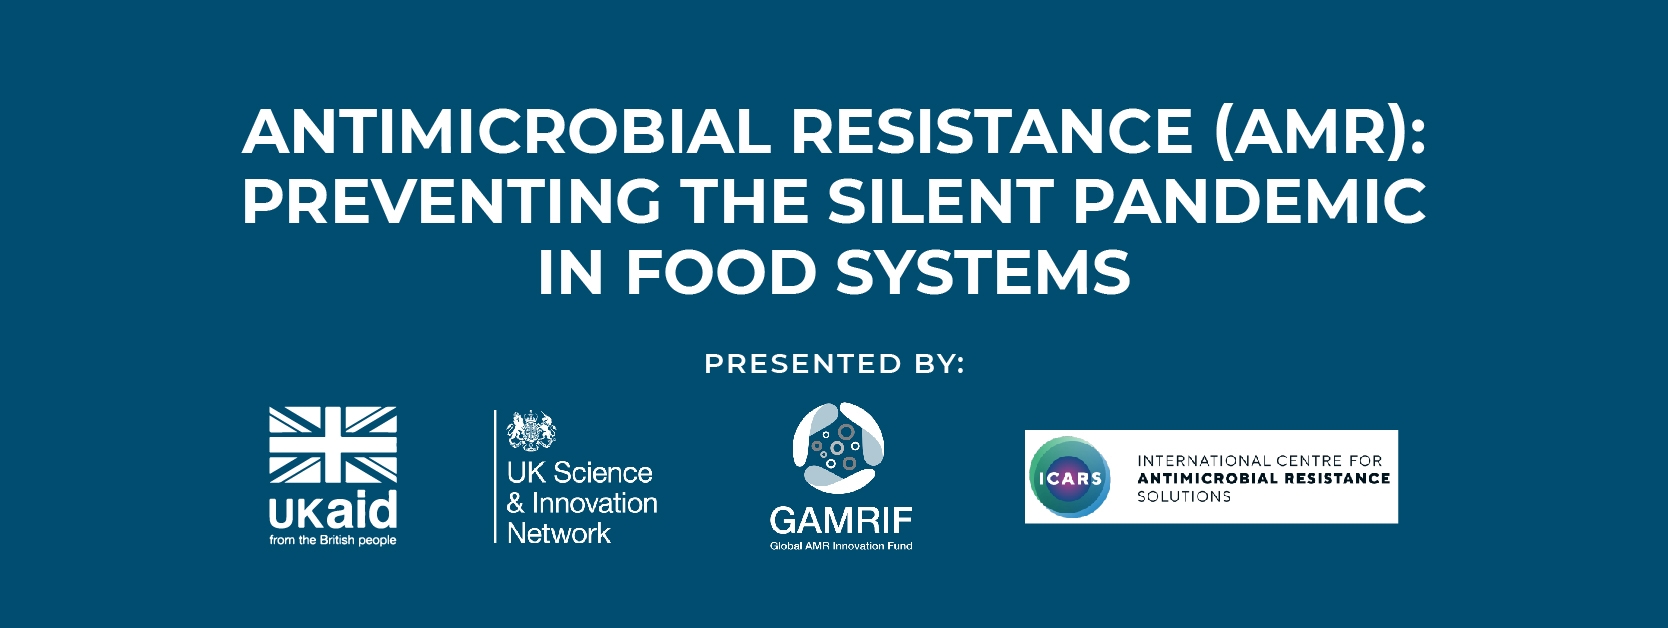 Antimicrobial Resistance: Preventing the Silent Pandemic in Food Systems